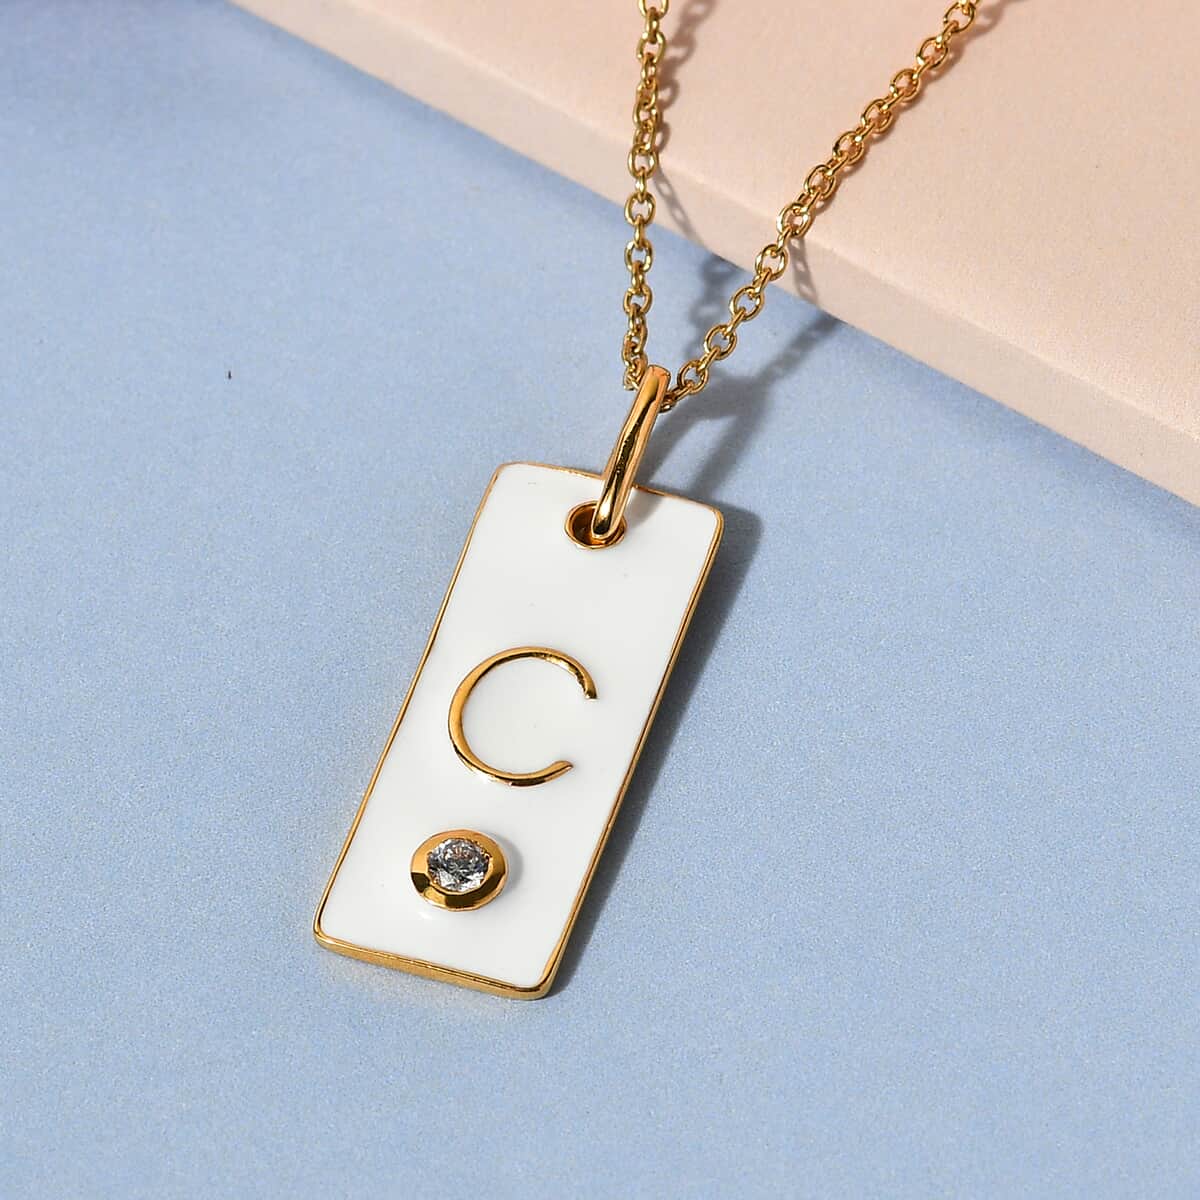 Lolos Exclusive Pick's KARIS Simulated Diamond Initial C Pendant Necklace 20 Inches in 18K YG Plated and ION Plated Yellow Gold Stainless Steel image number 1